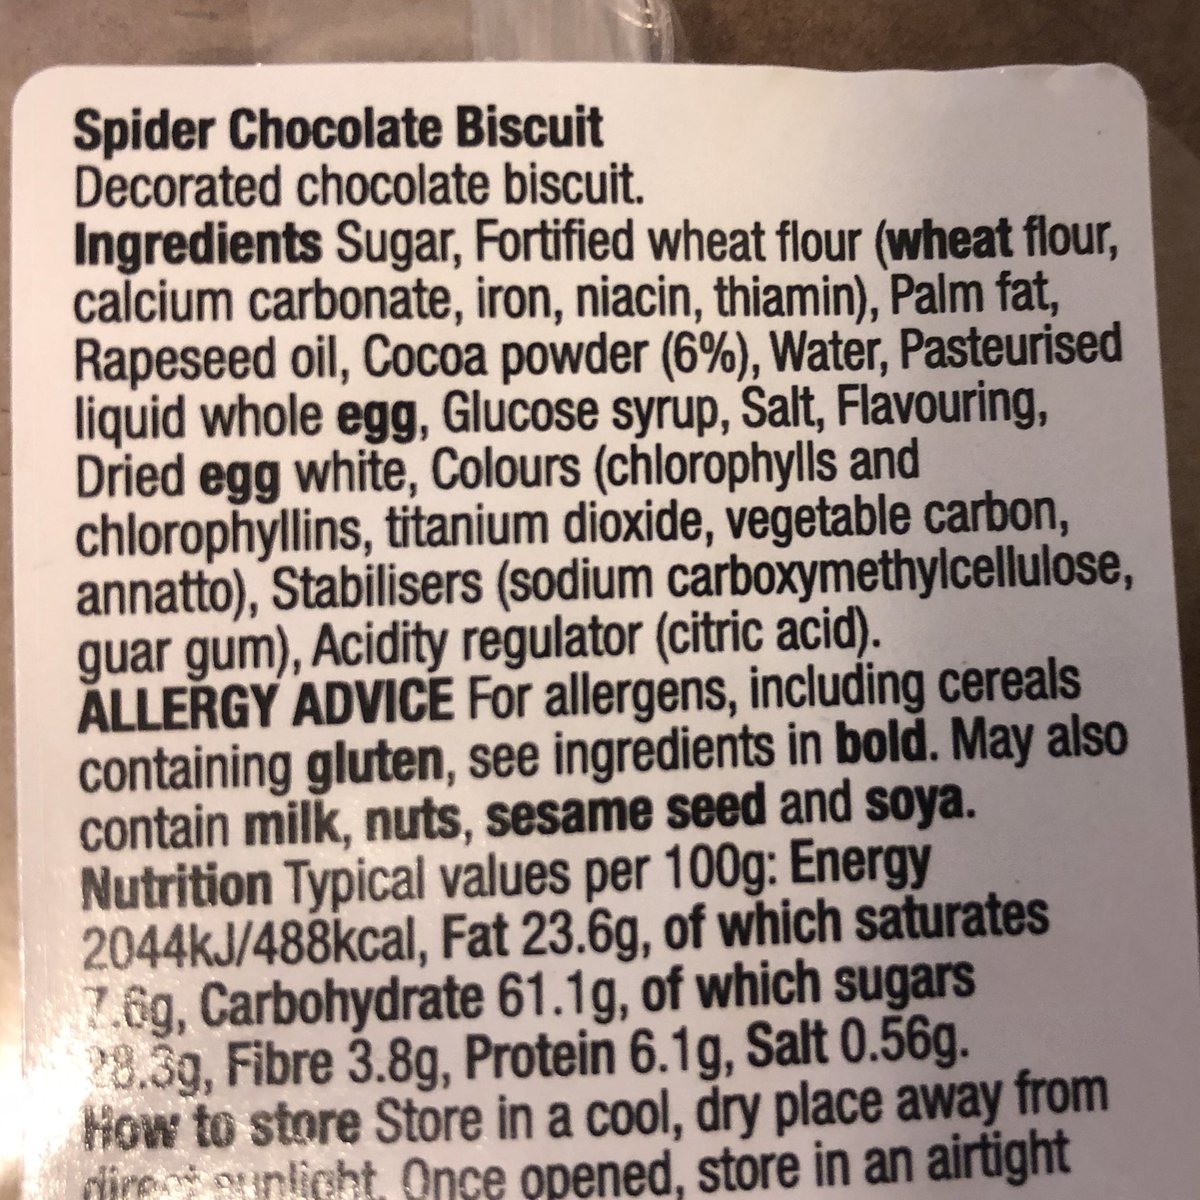 MORRISONS SPIDER BISCUITThis guy wears a hat apparently made from the same flesh as his own legs. That’s not just spooky, that’s metal as hell /5